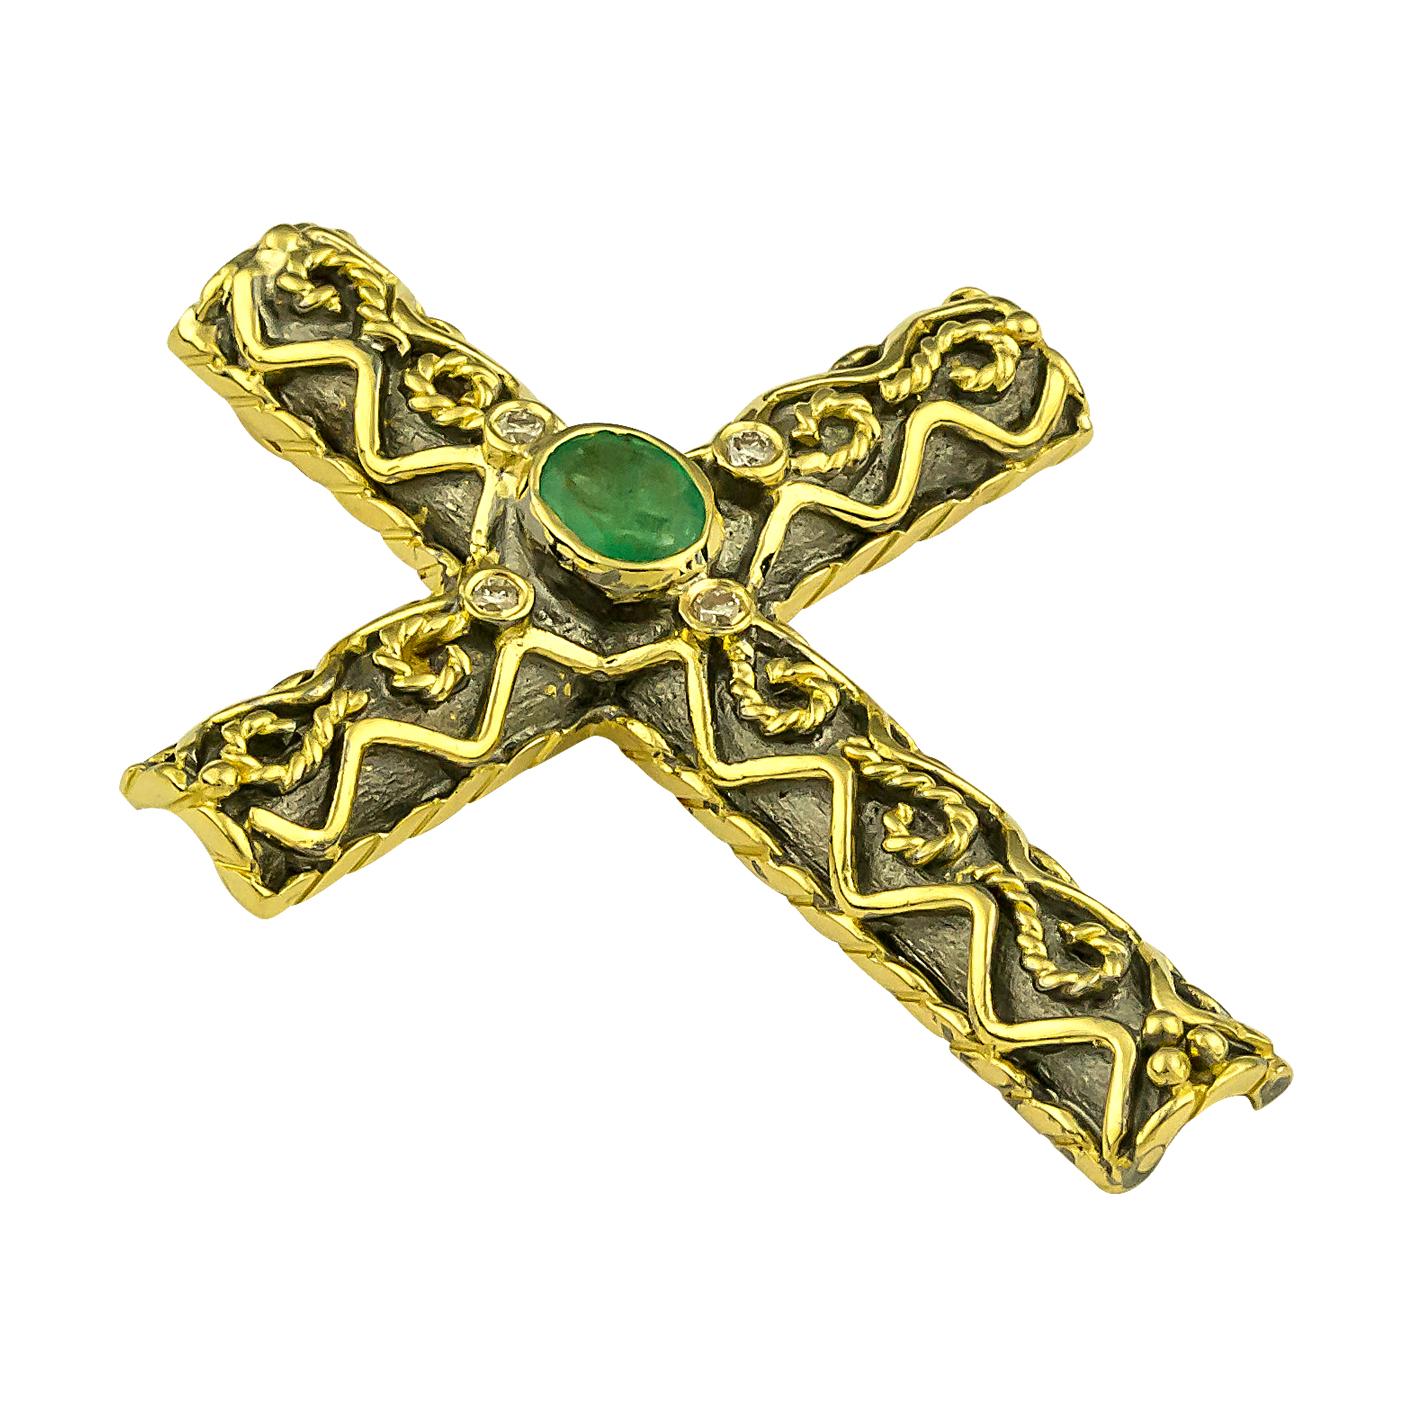 S.Georgios Designer Byzantine Style Cross is handmade from solid 18 Karat Yellow Gold and features an oval shape, Emerald, the weight of 0,35 Carat, and four (4) White Diamonds total weight of 0,06 Carat. This art piece is made with granulation work